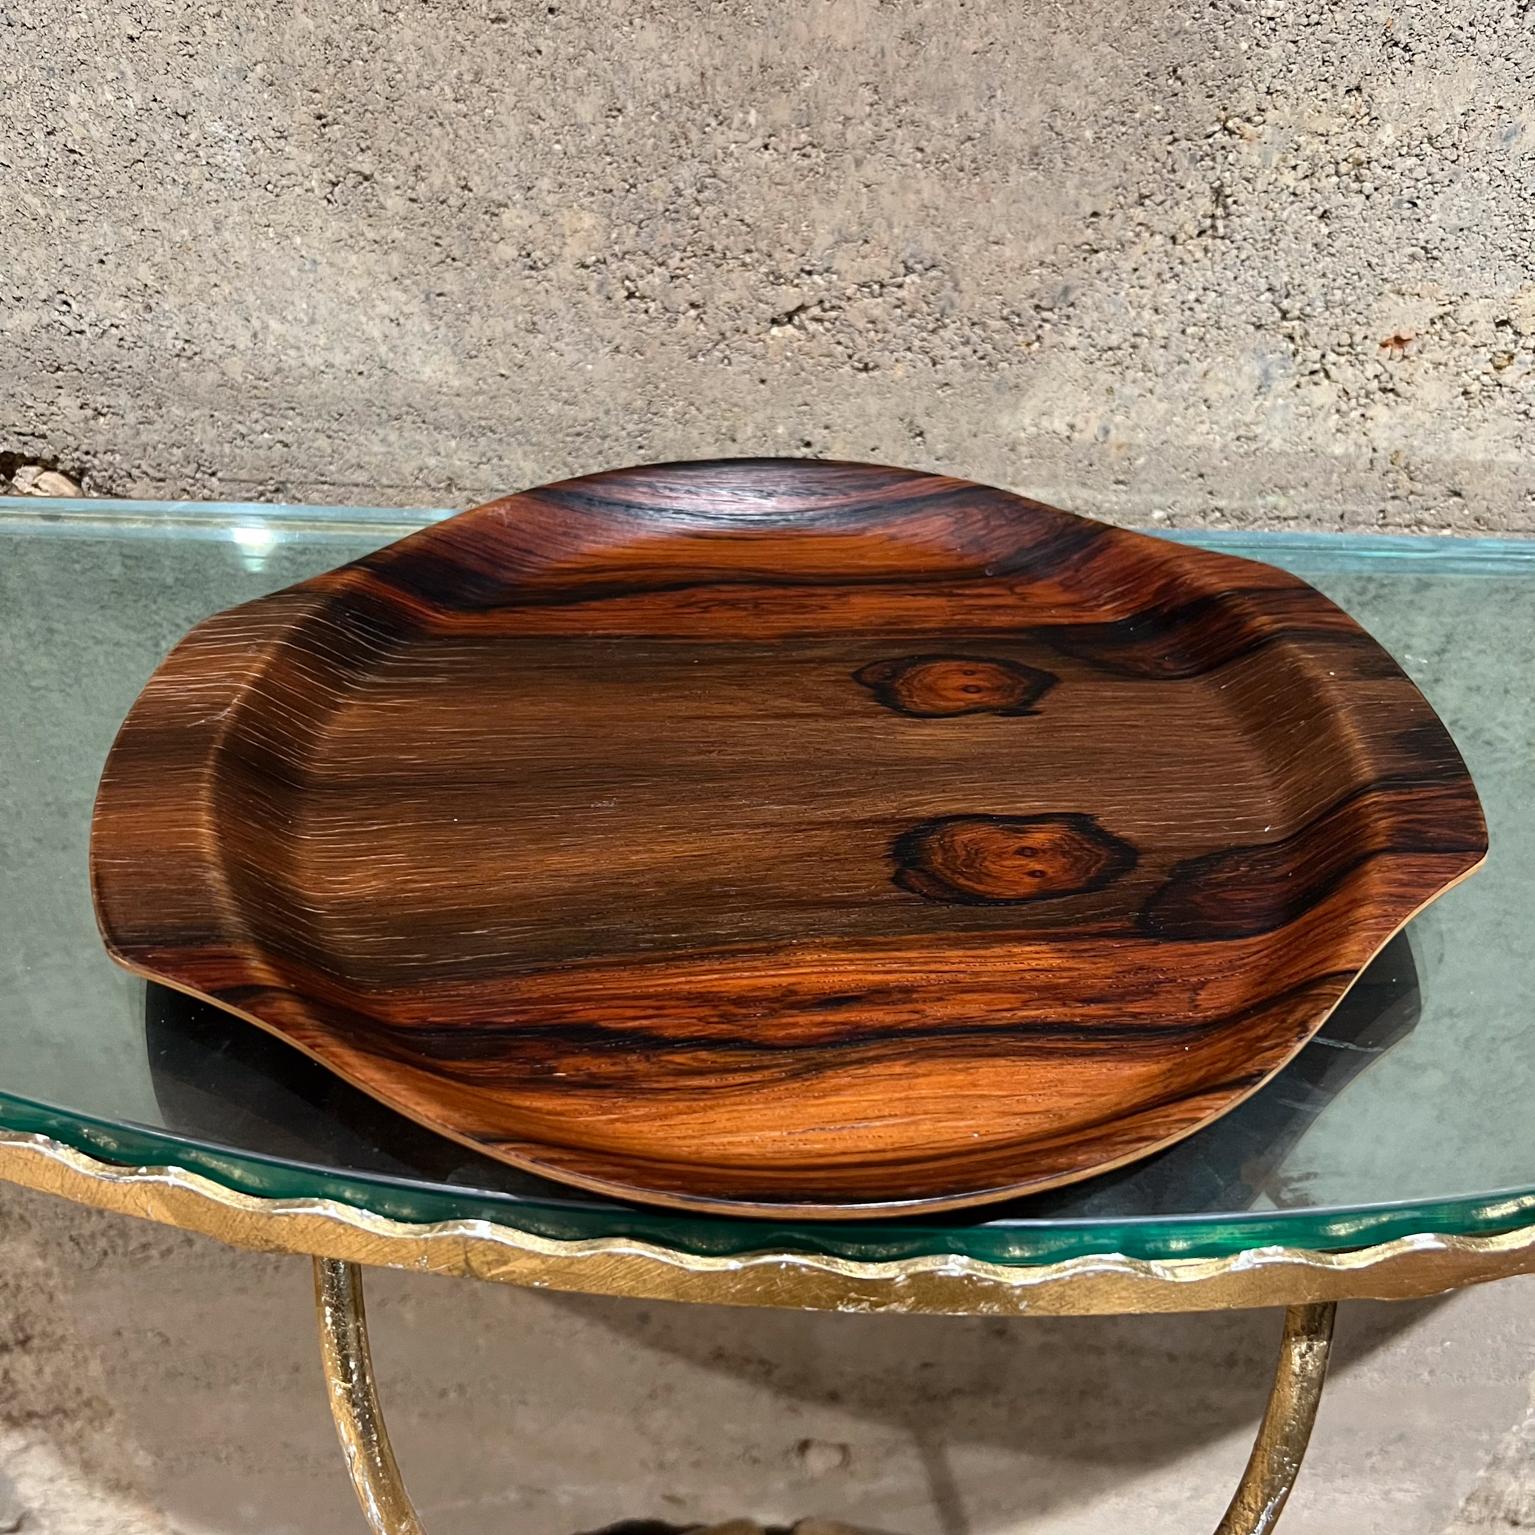 Vintage Hostess Round Wood Serving Tray
Bar Service Platter
Rosewood
.63 h x 10 w x 11.5 long
Unrestored original vintage
See all images provided.